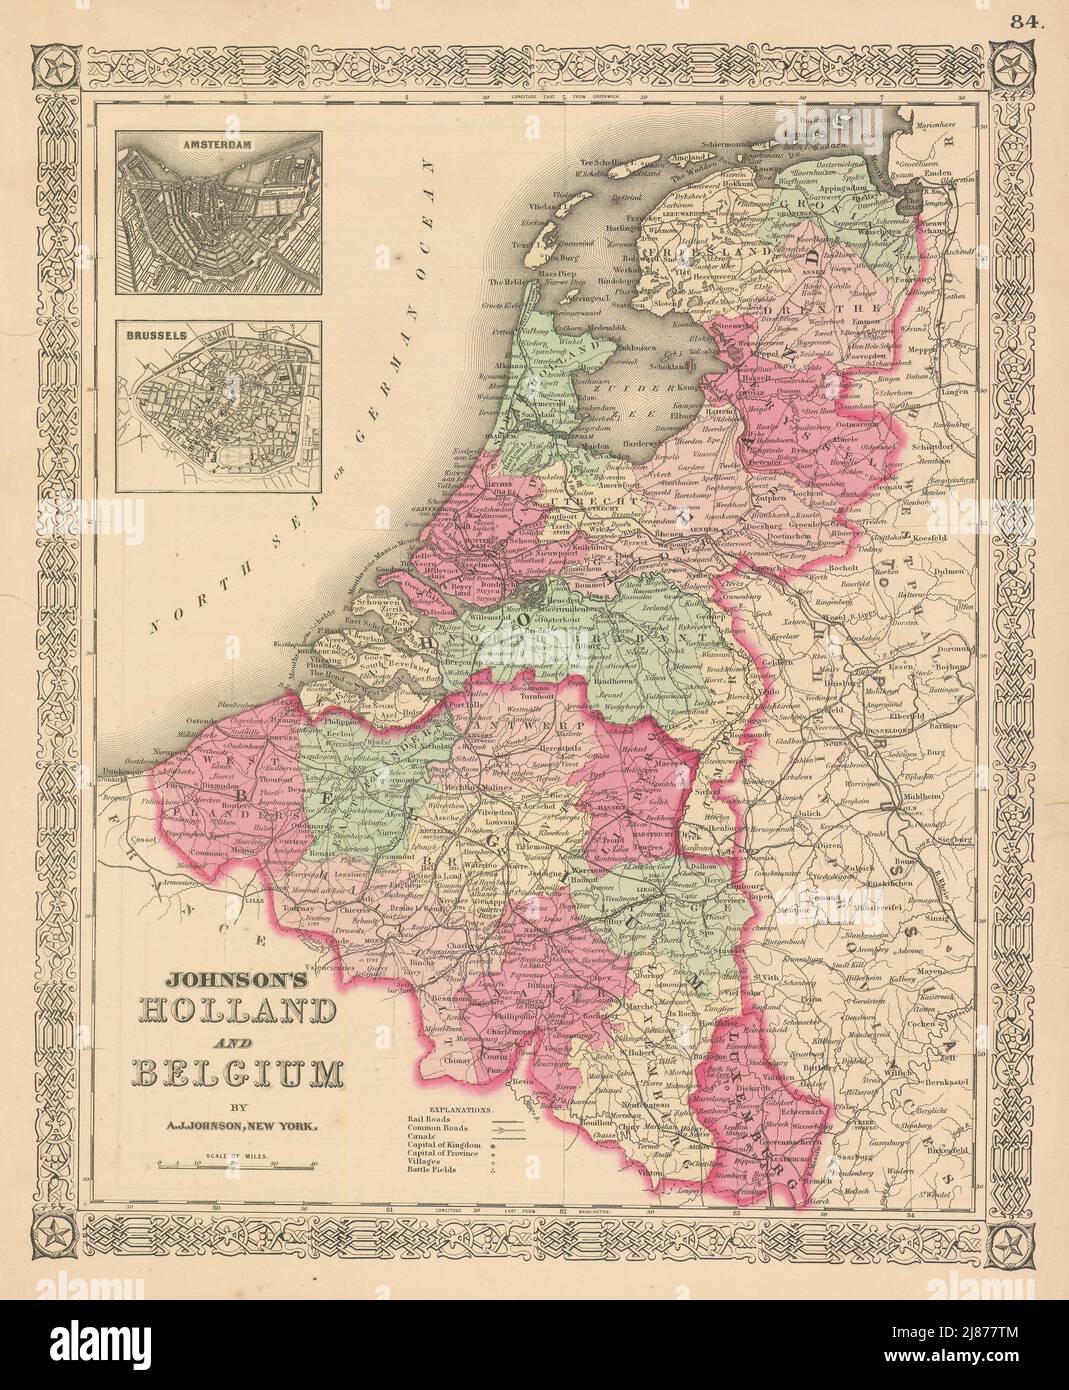 Johnson's Holland and Belgium. Benelux. Amsterdam & Brussels 1867 old map Stock Photo